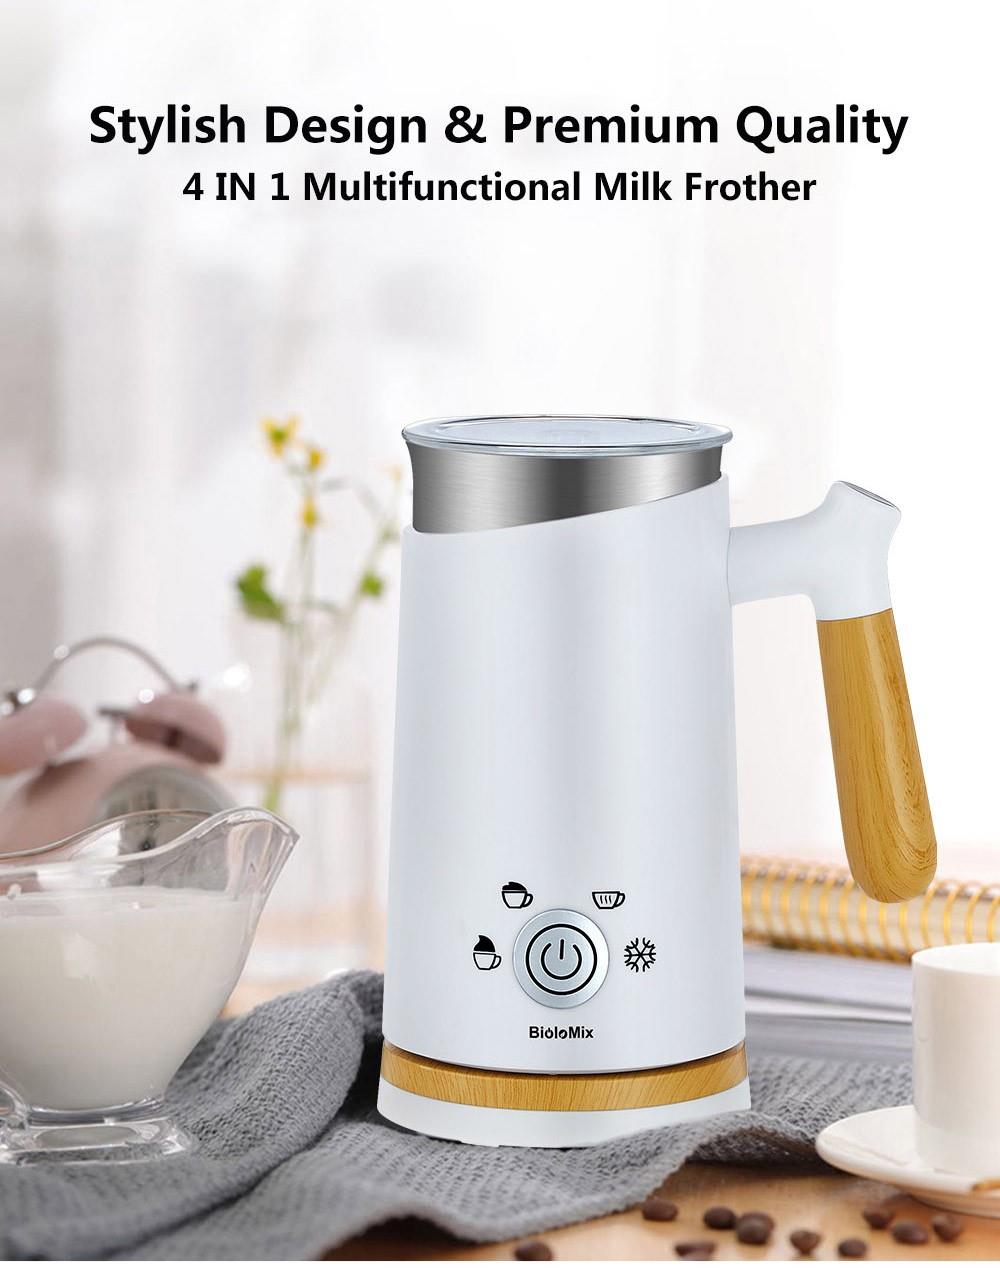 BioloMix Detachable Milk Frother and Steamer,5-in-1 Automatic Hot